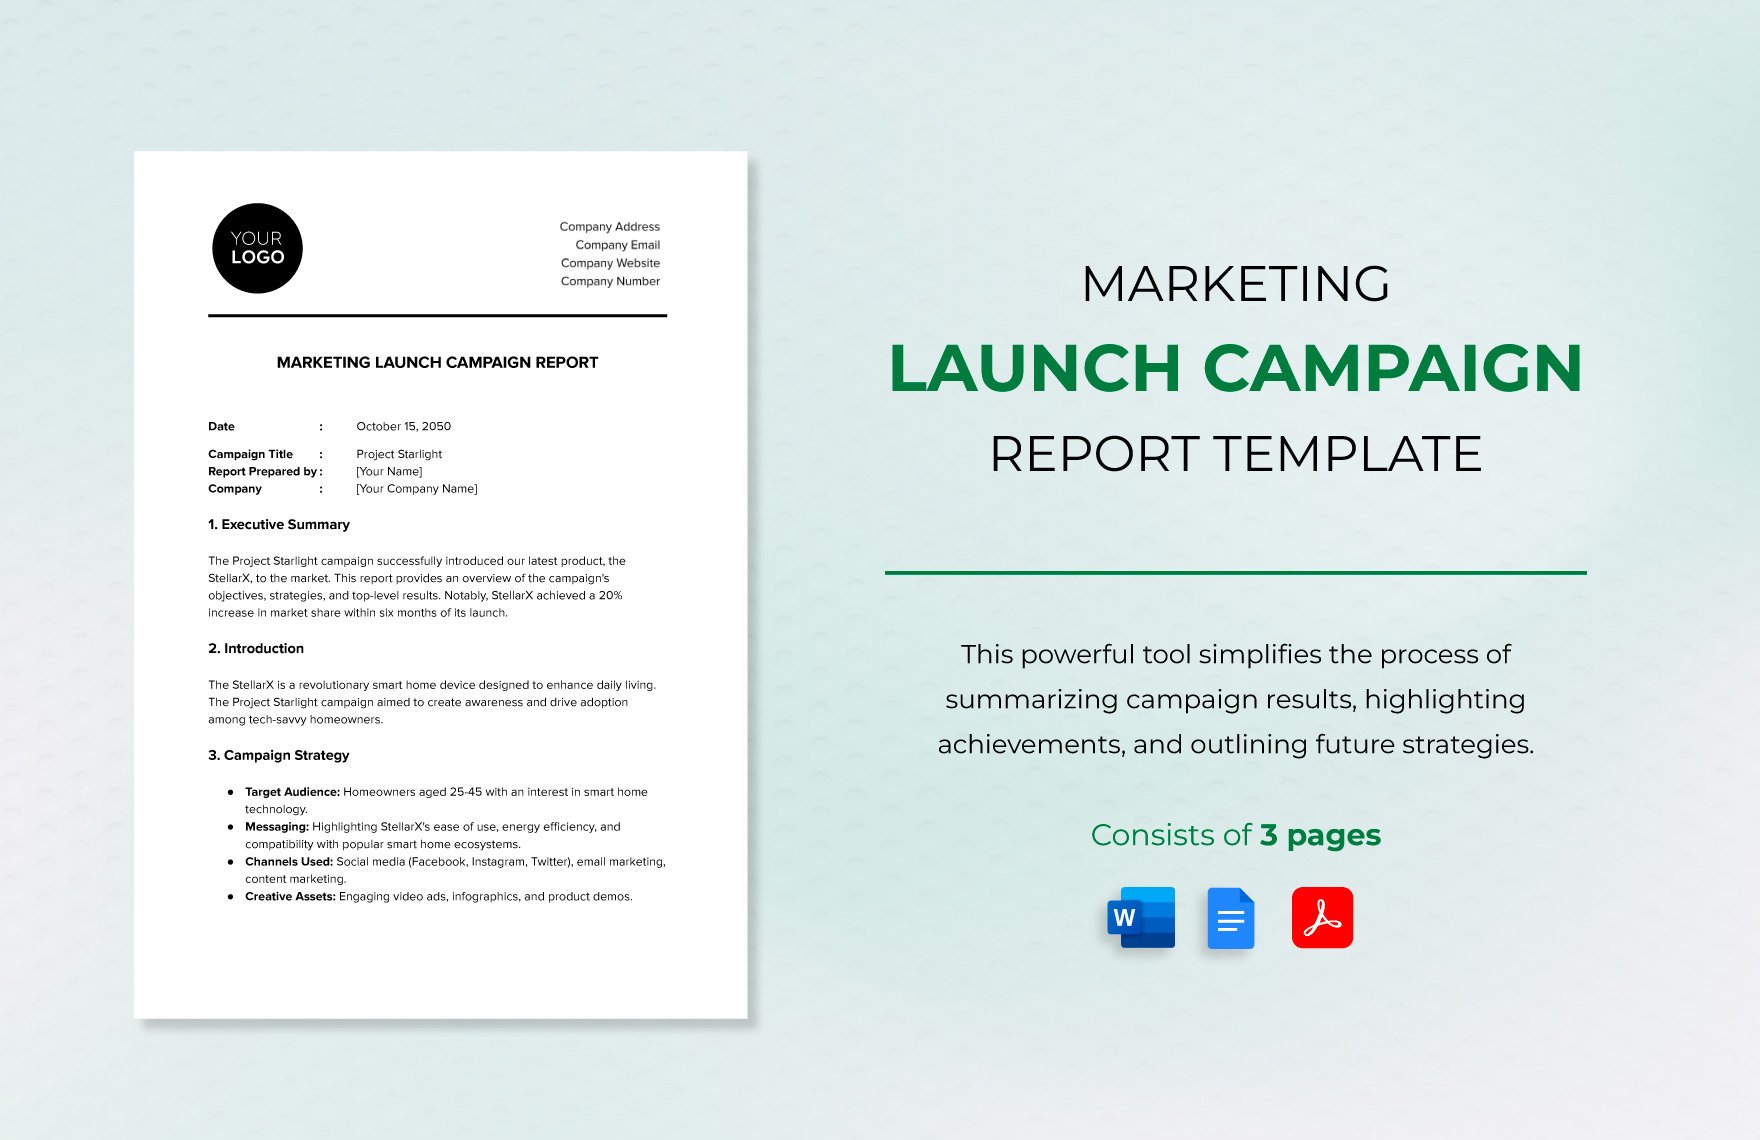 Marketing Launch Campaign Report Template